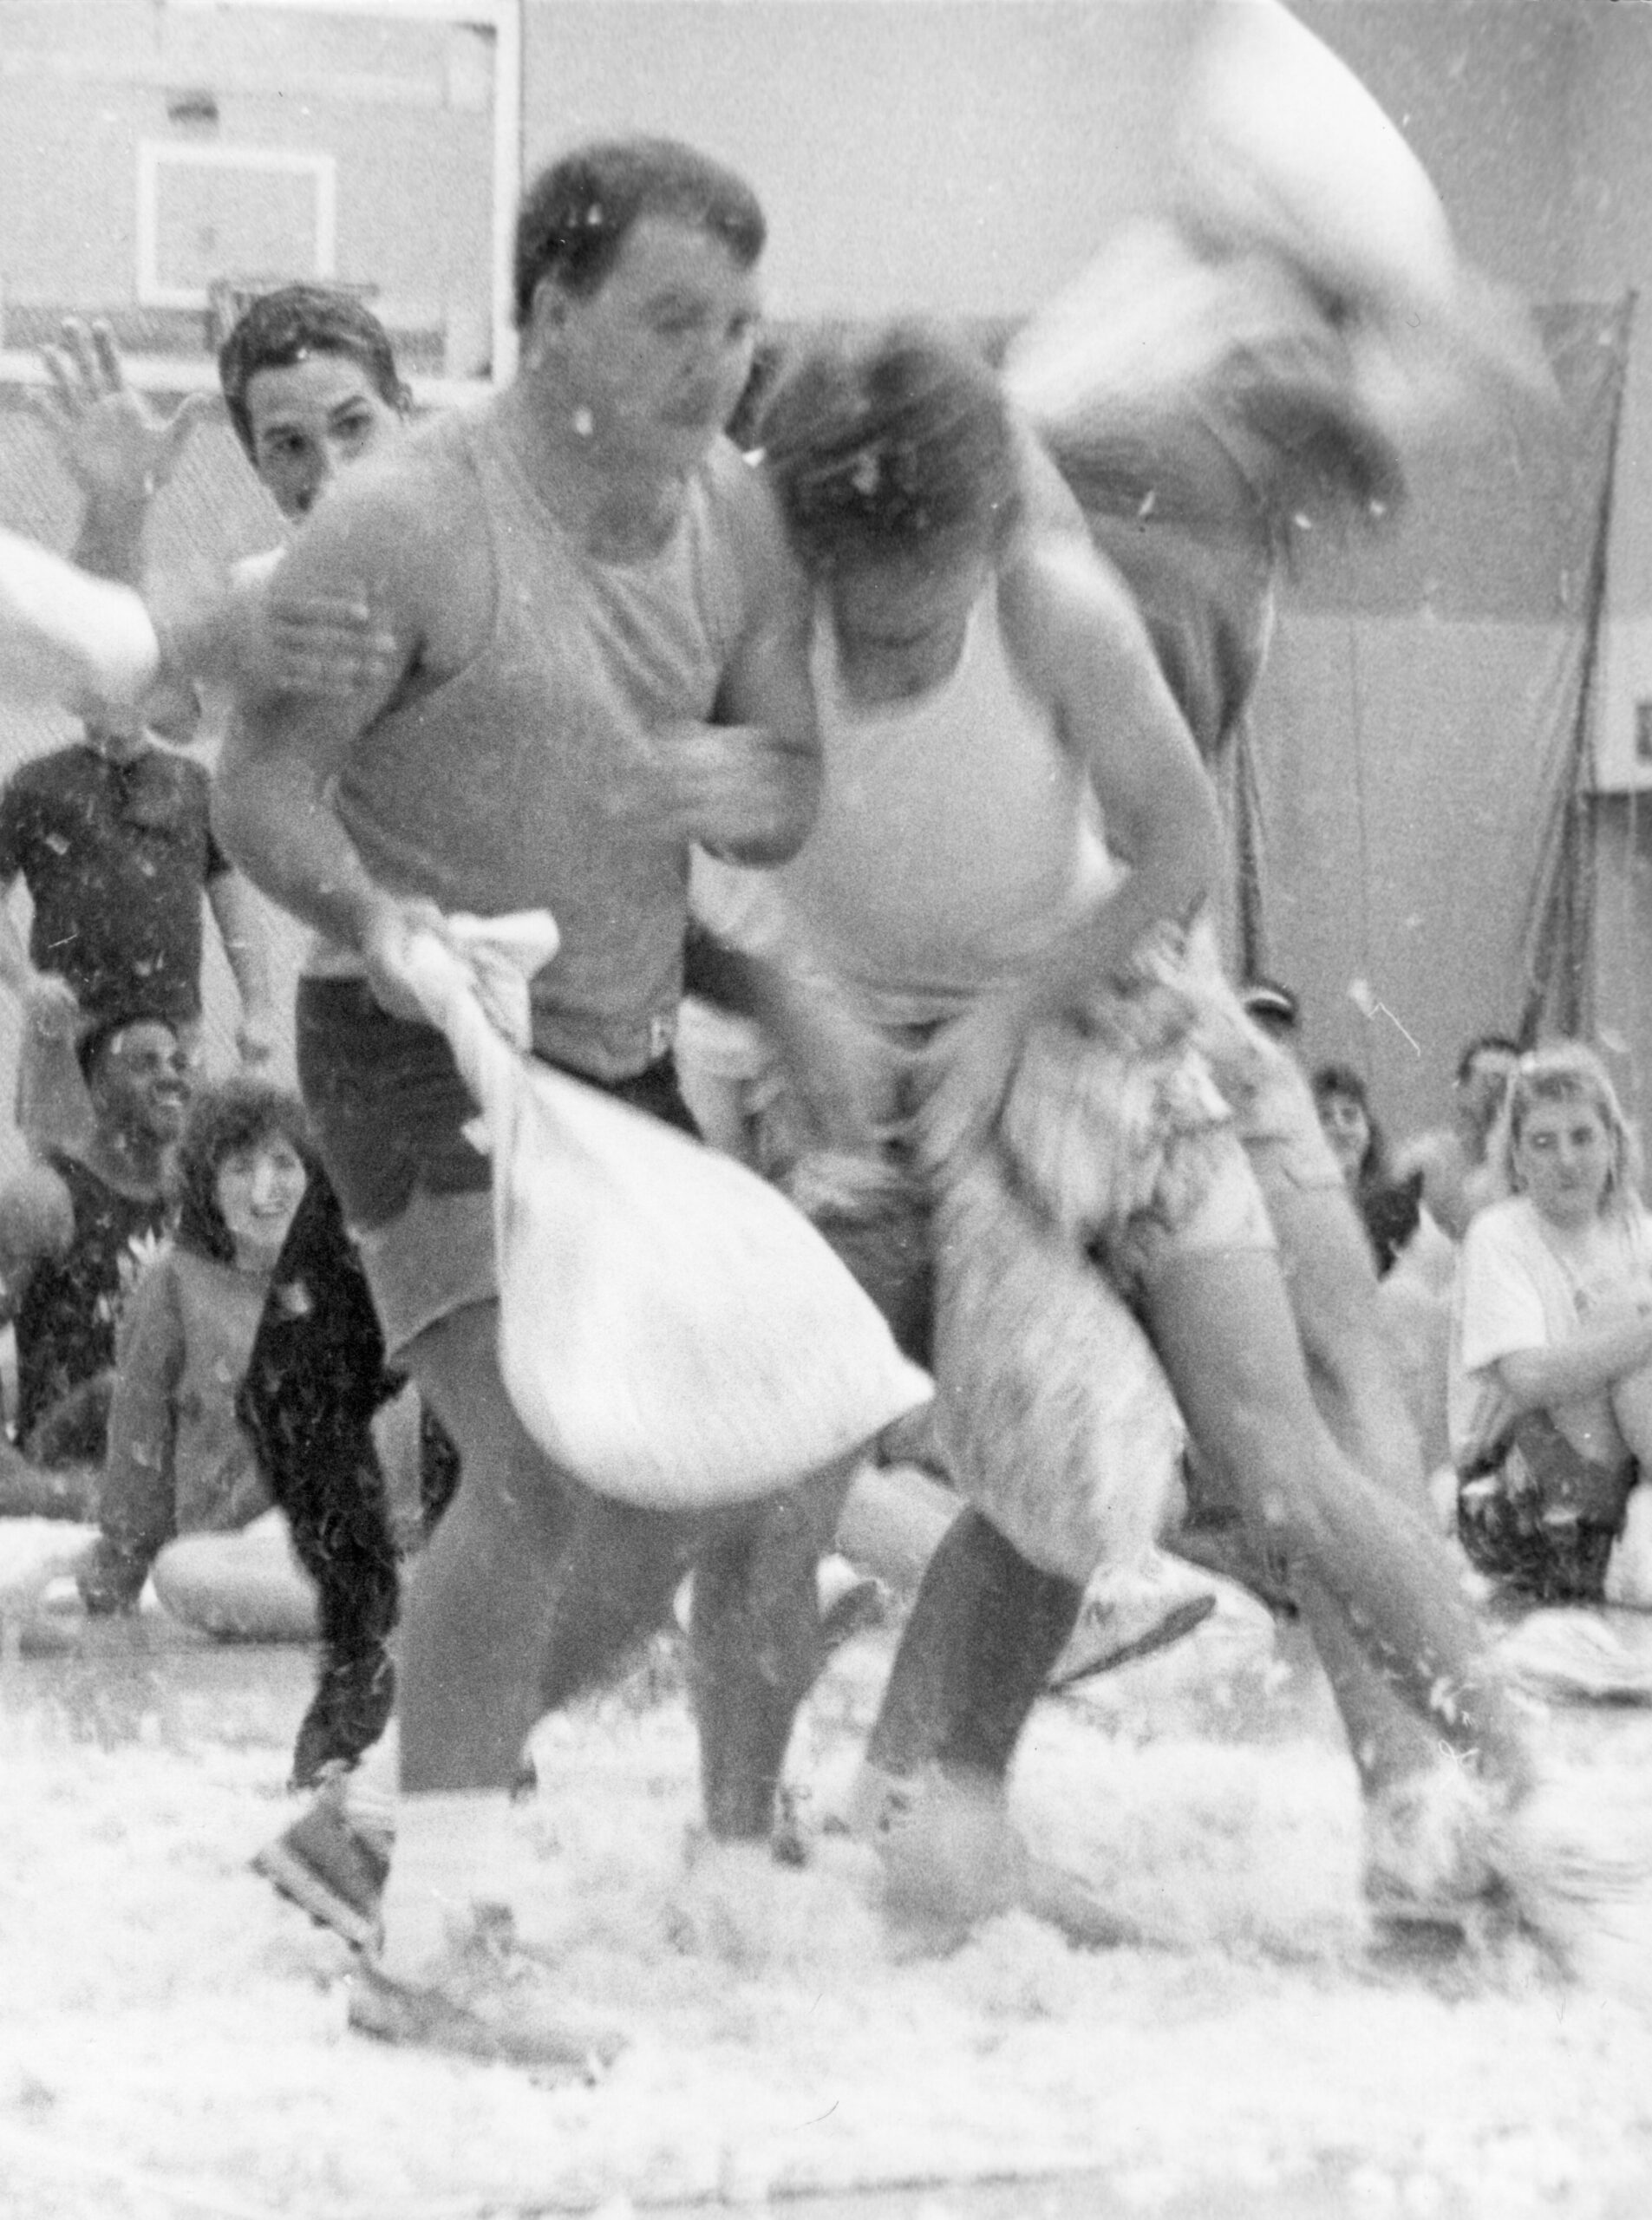 Although feather pillows were not allowed in the 1988 pillow fight, someone clearly didn’t follow directions! [College Archives]